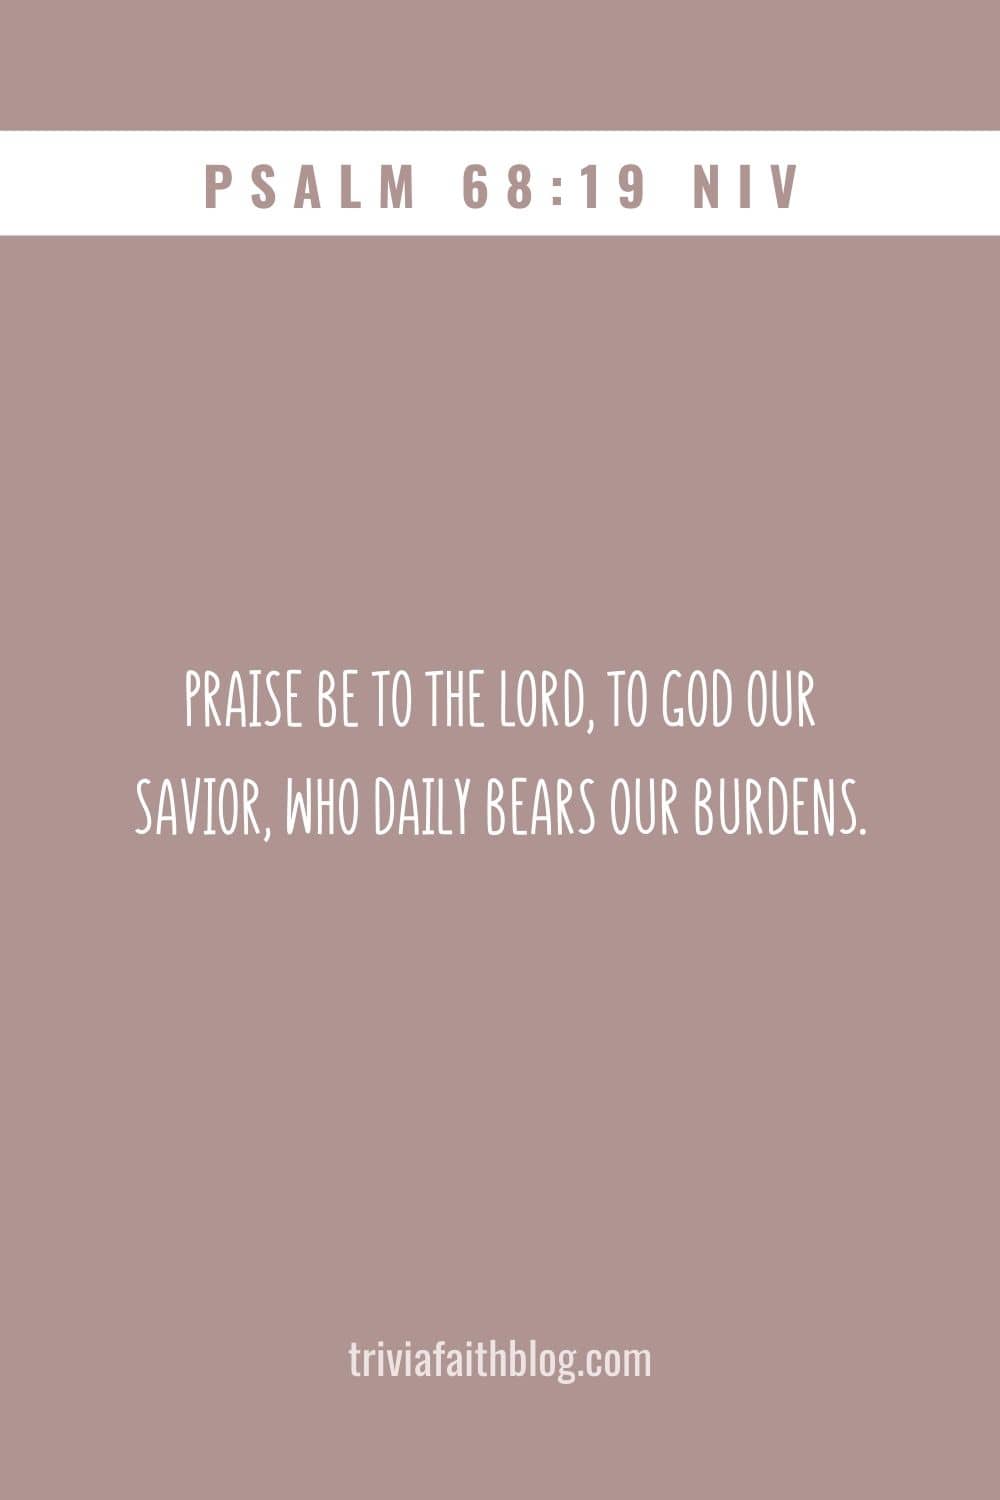 Praise be to the Lord, to God our Savior, who daily bears our burdens